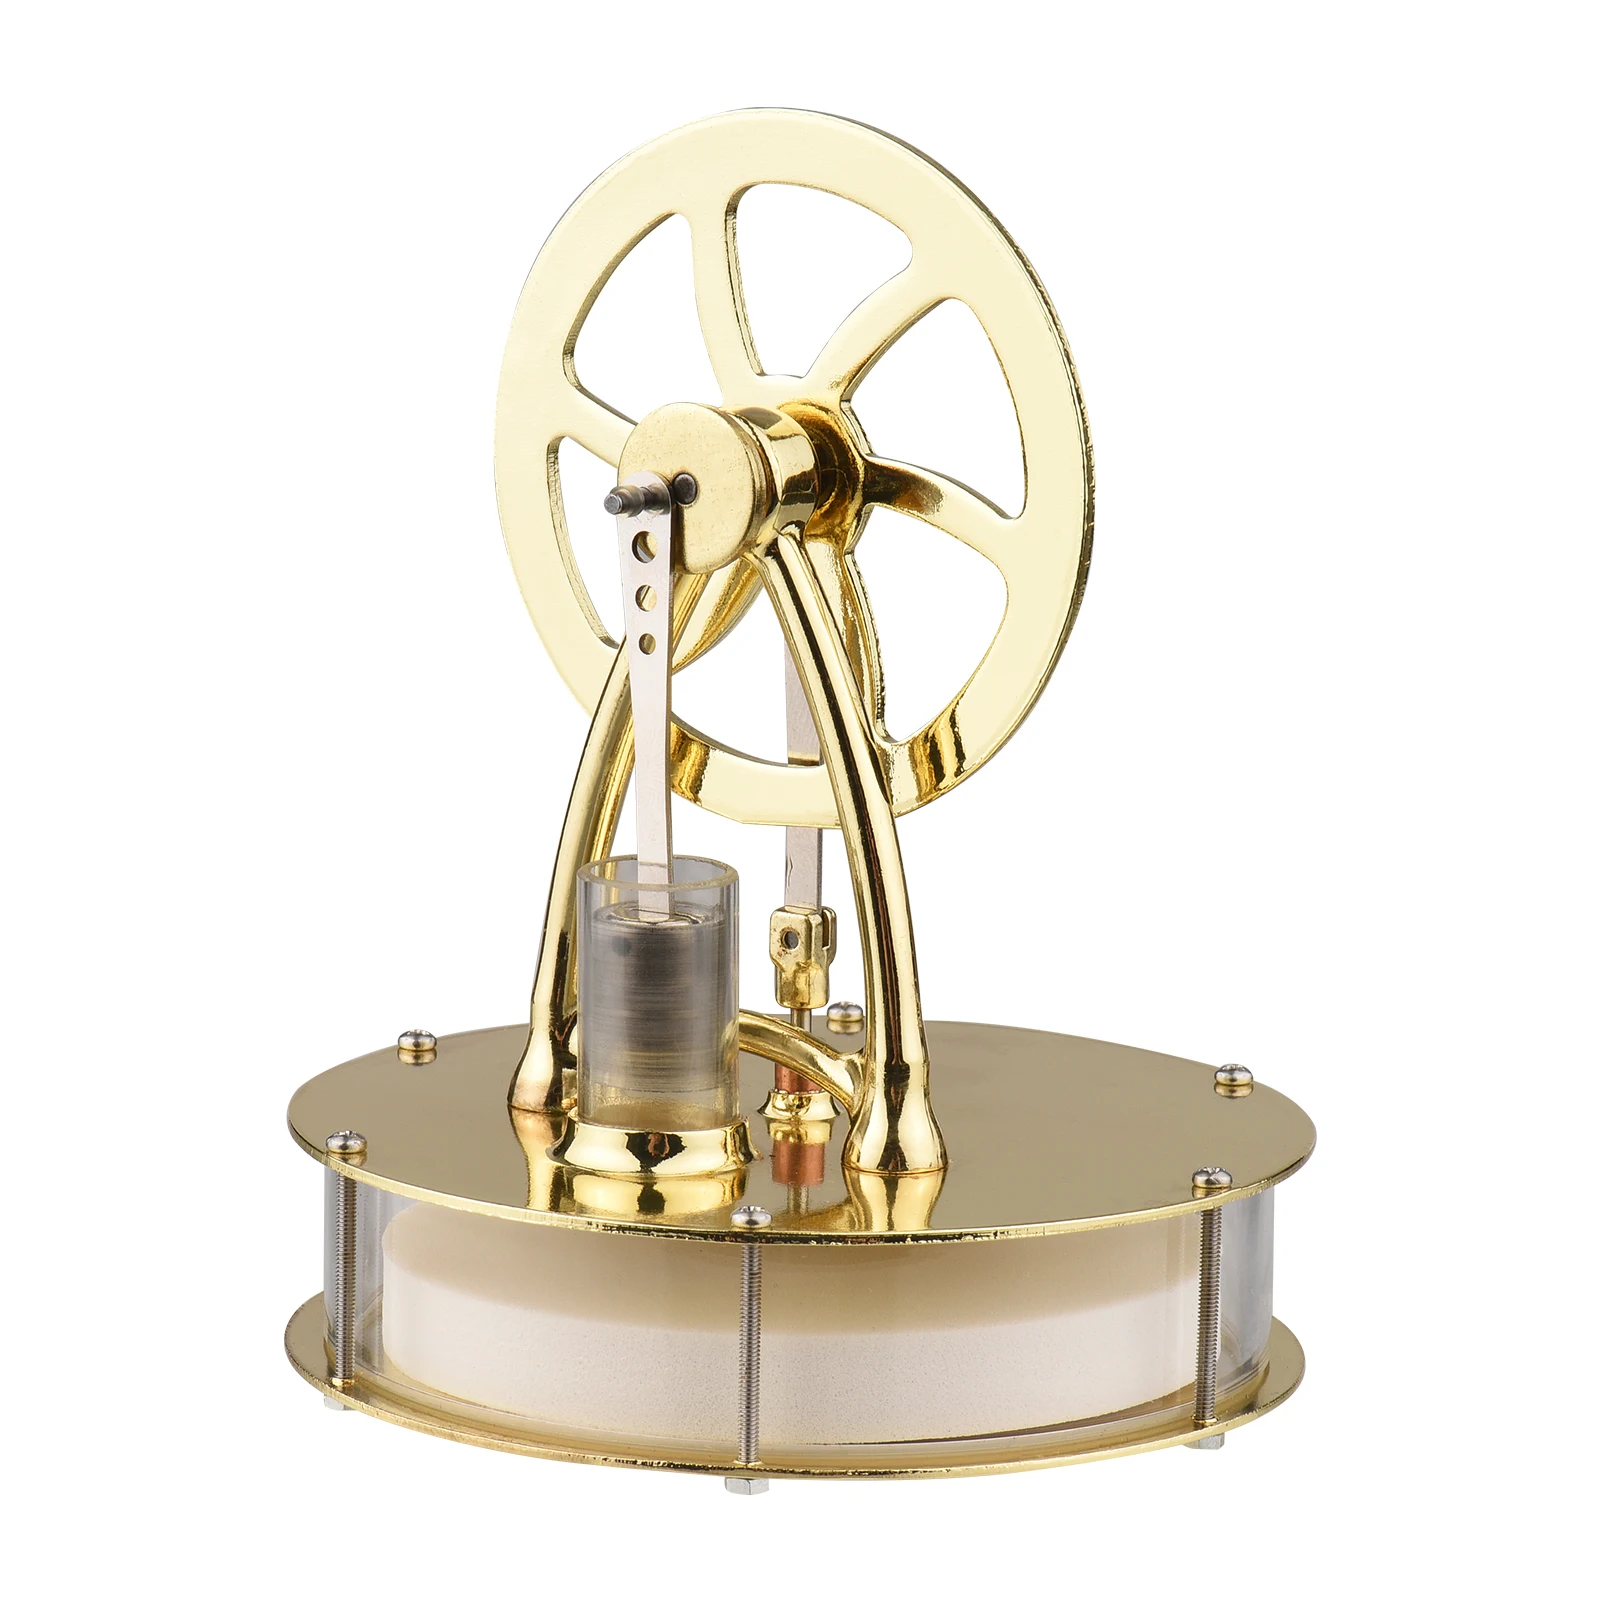 Aibecy Low Temperature Stirling Engine Motor Steam Heat Education Model Toy 1PC 